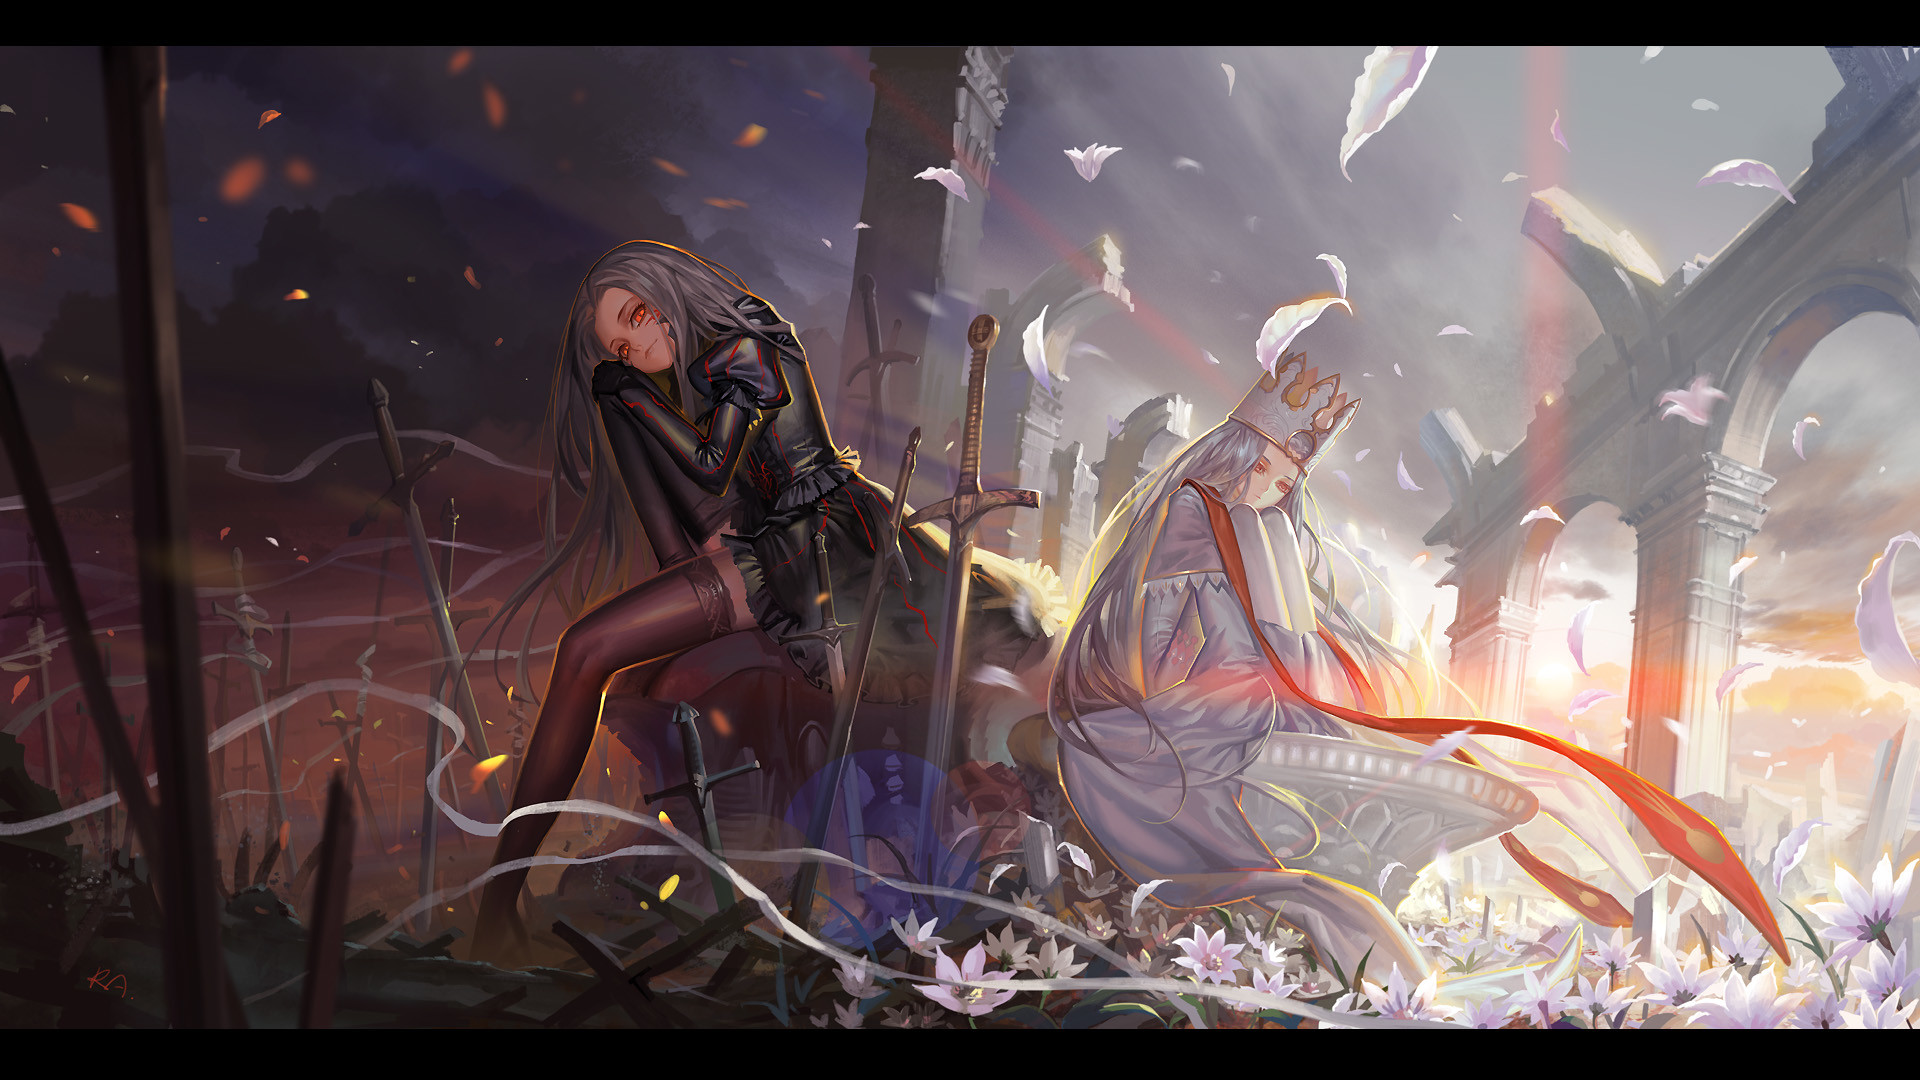 1920x1080 Fate/stay night download Fate/stay night image